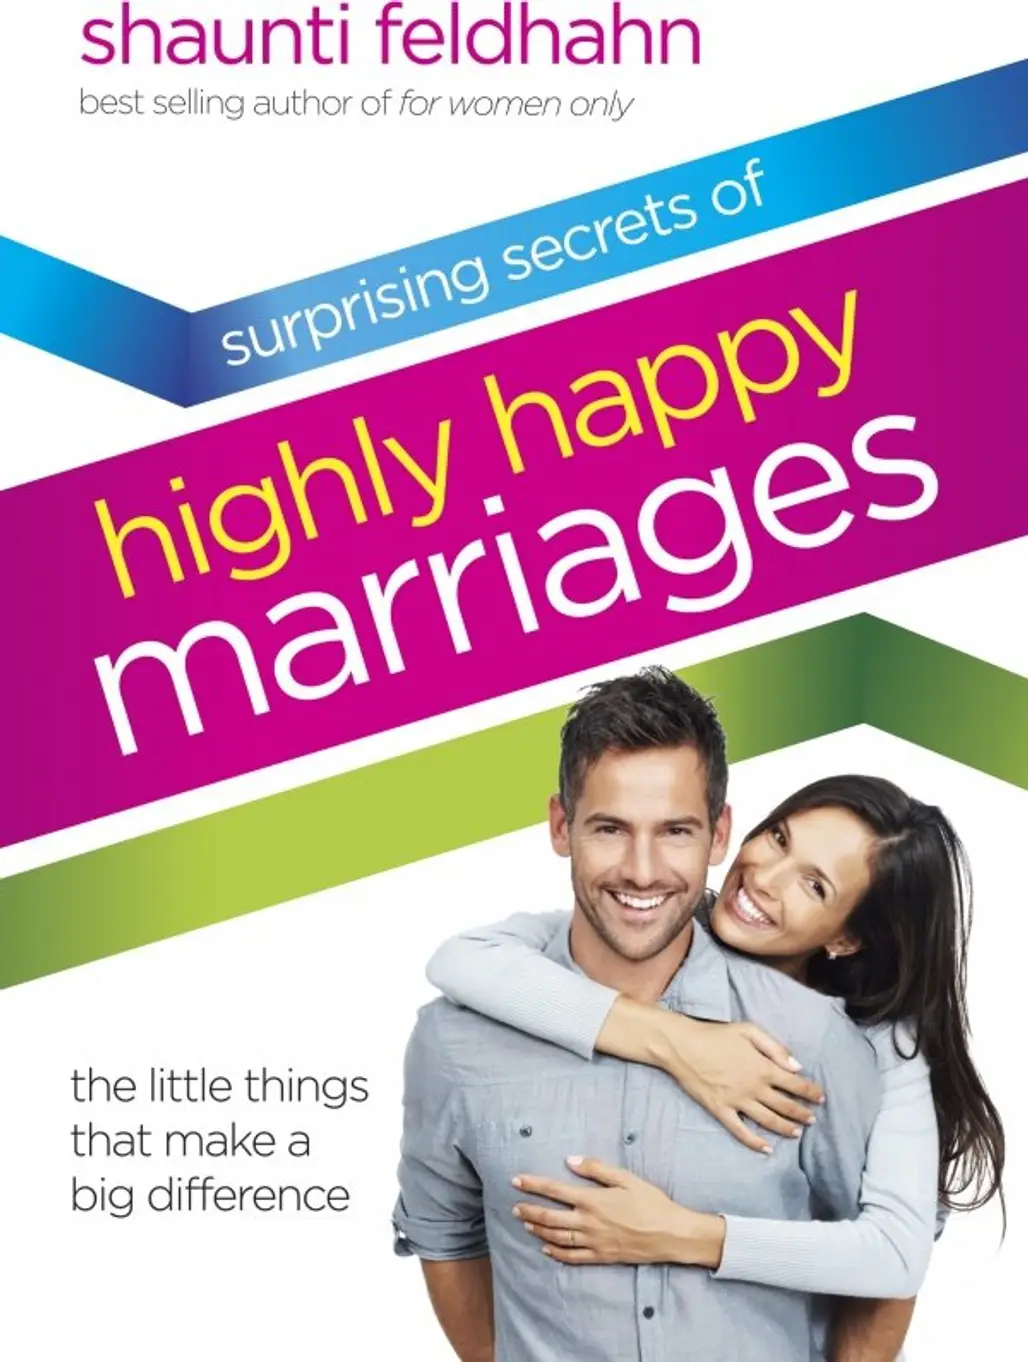 “the Surprising Secrets of Highly Happy Marriages”